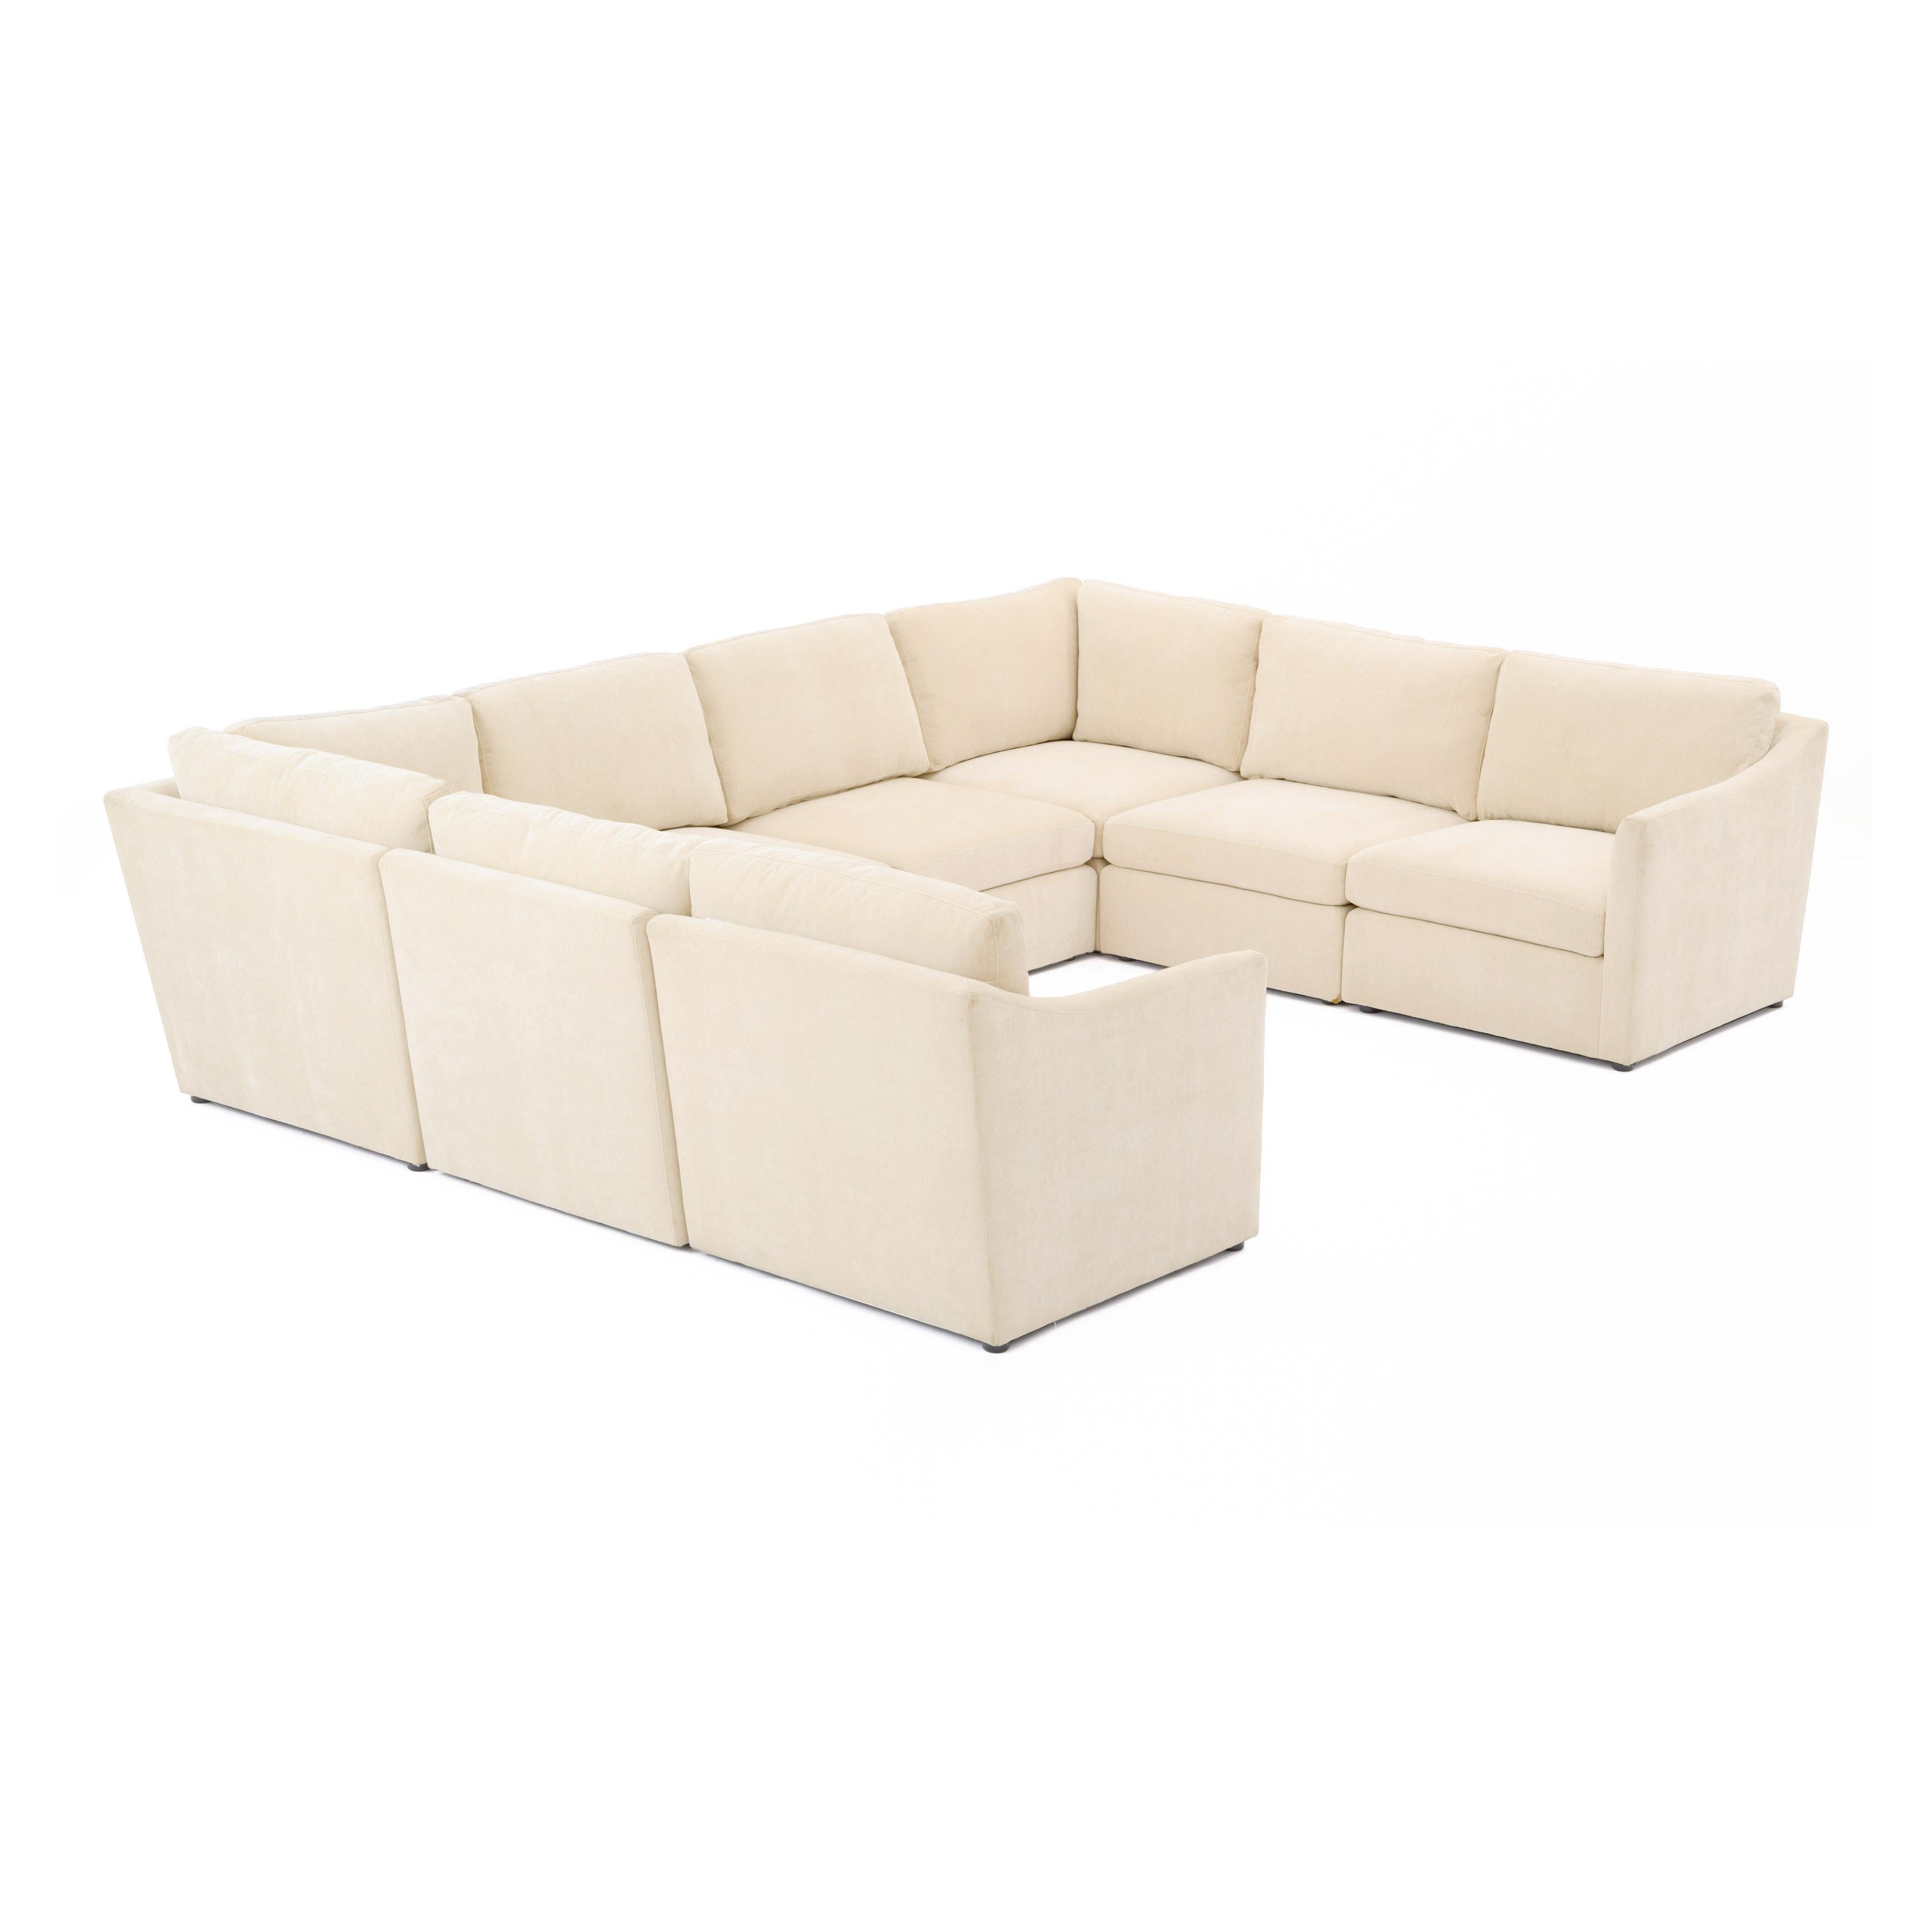 Tov Furniture Sectionals - Aiden Beige Modular U Sectional